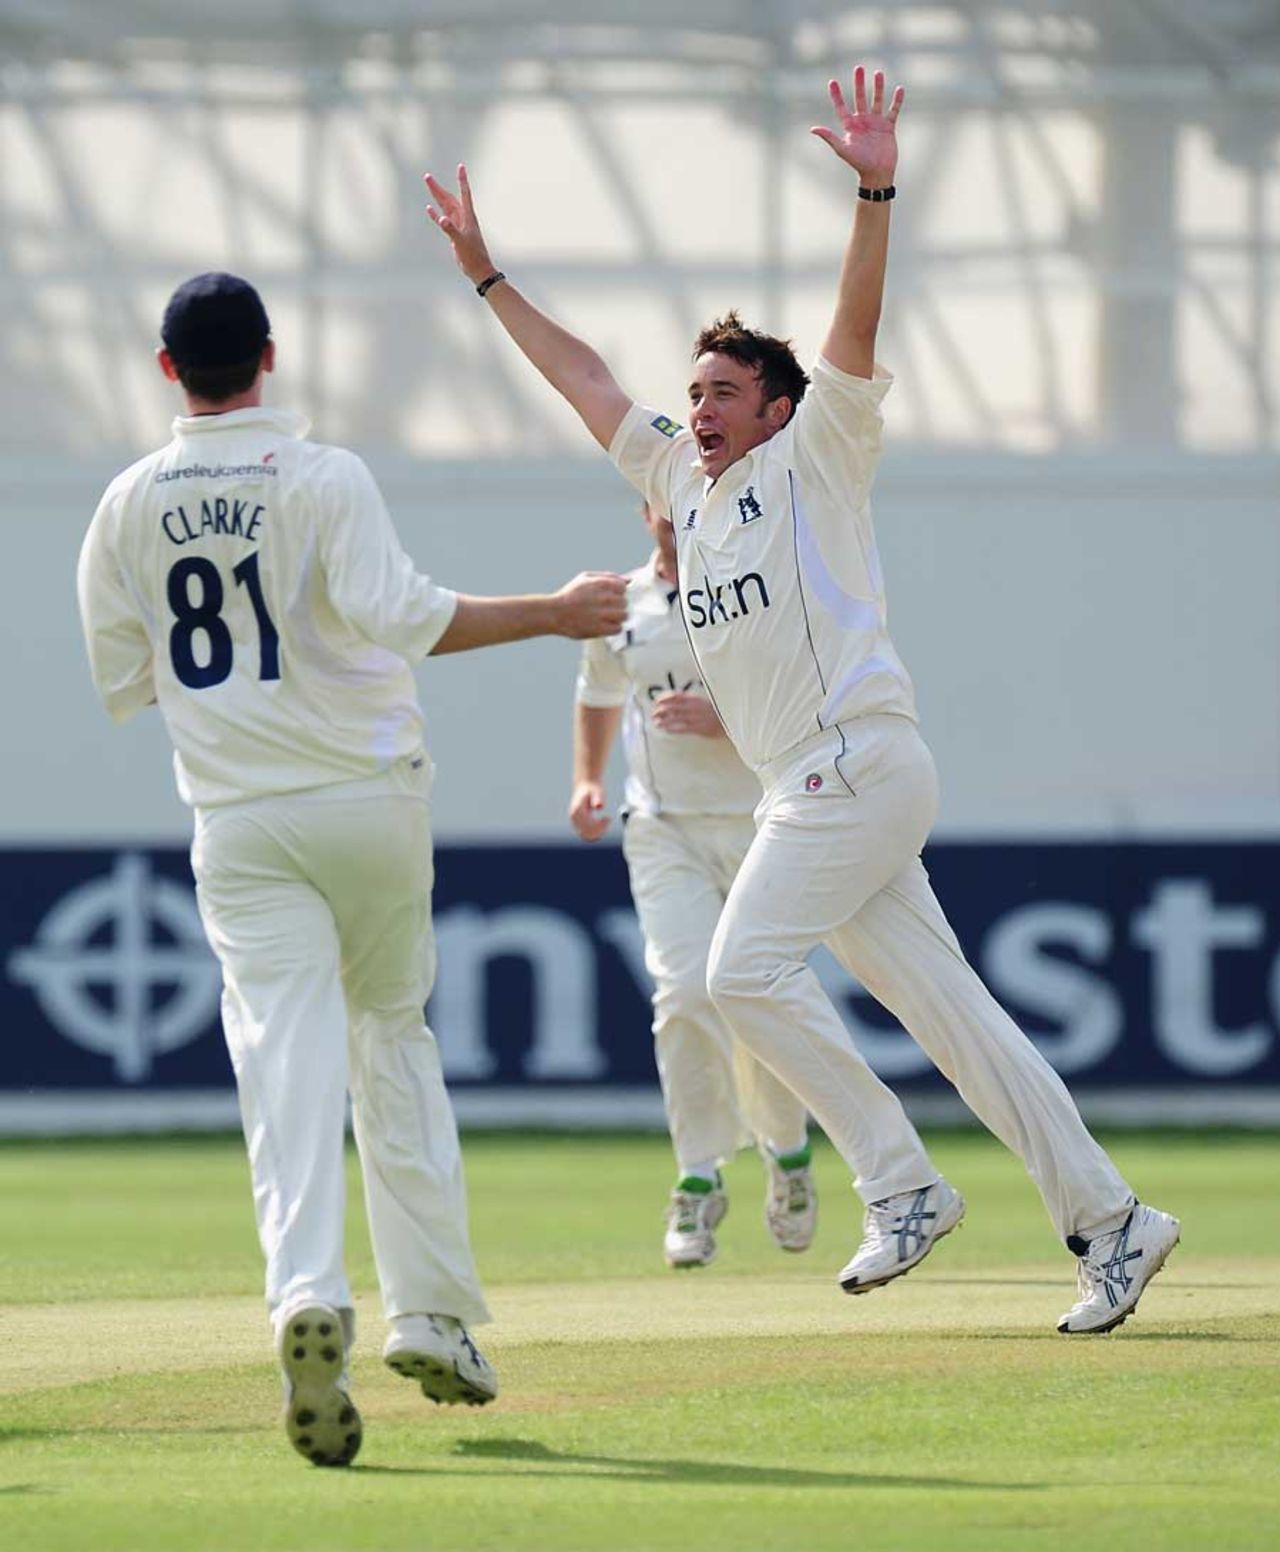 Neil Carter took five wickets to help Warwickshire wrap up victory, Warwickshire v Kent, County Championship, Division One, Edgbaston, September 2, 2010